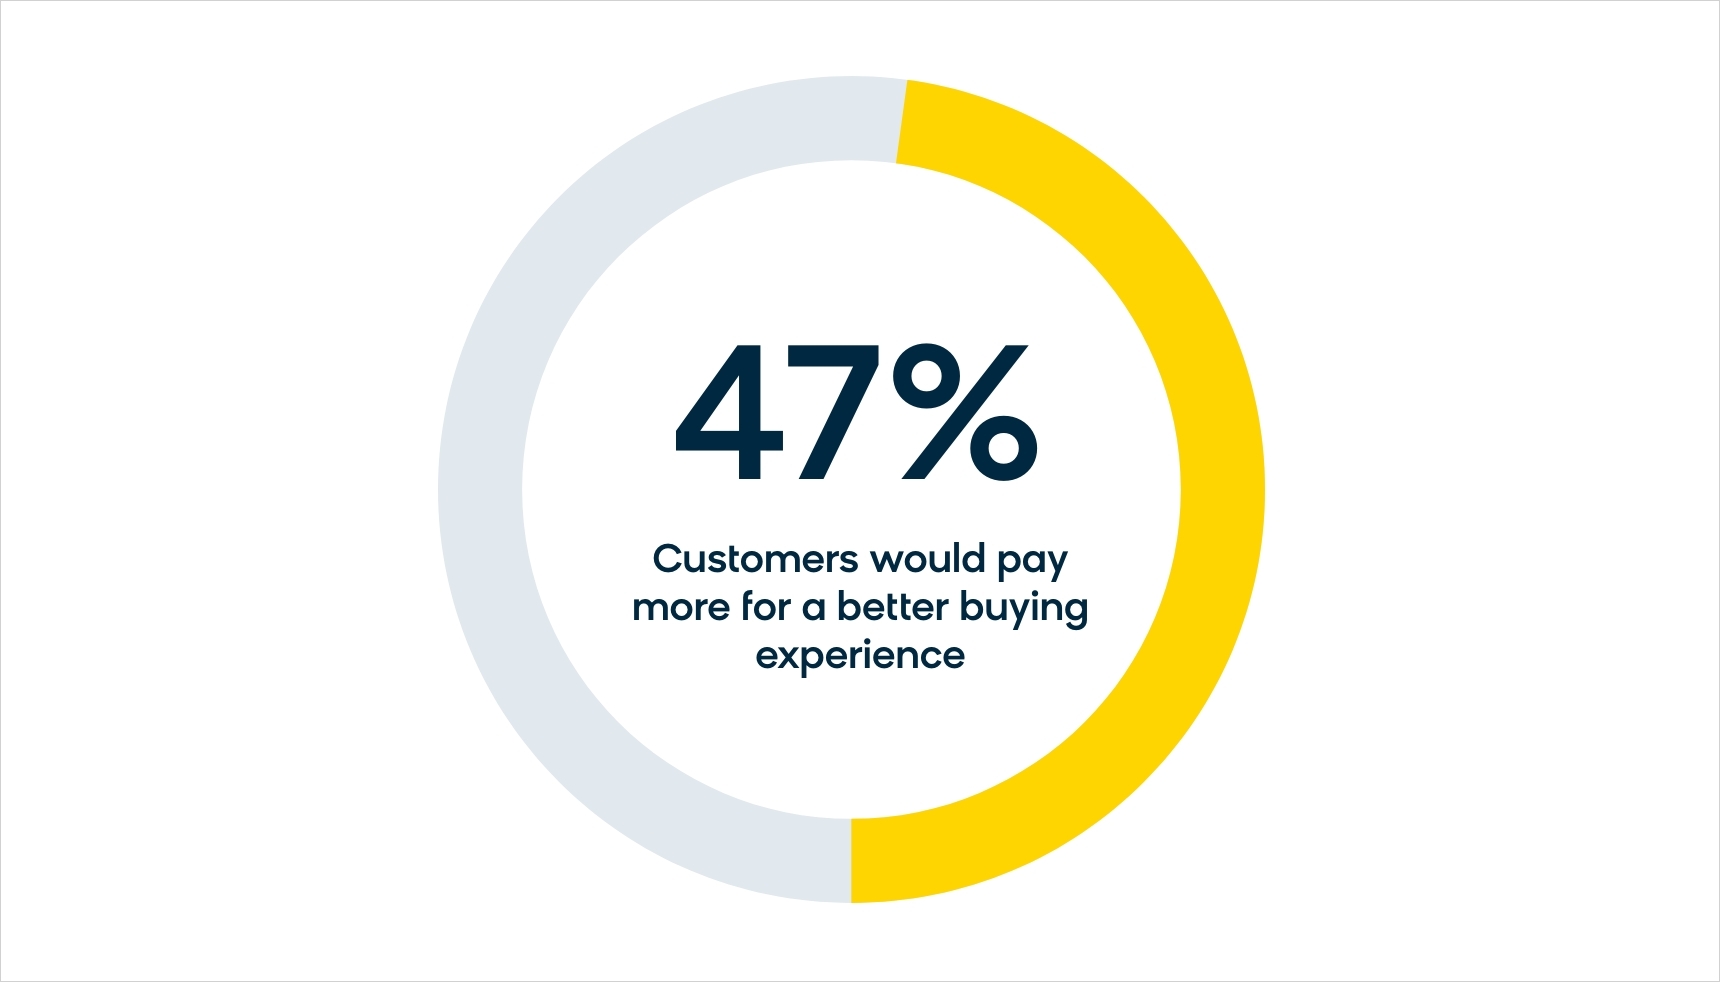 47% of customers would pay more for a better buying experience